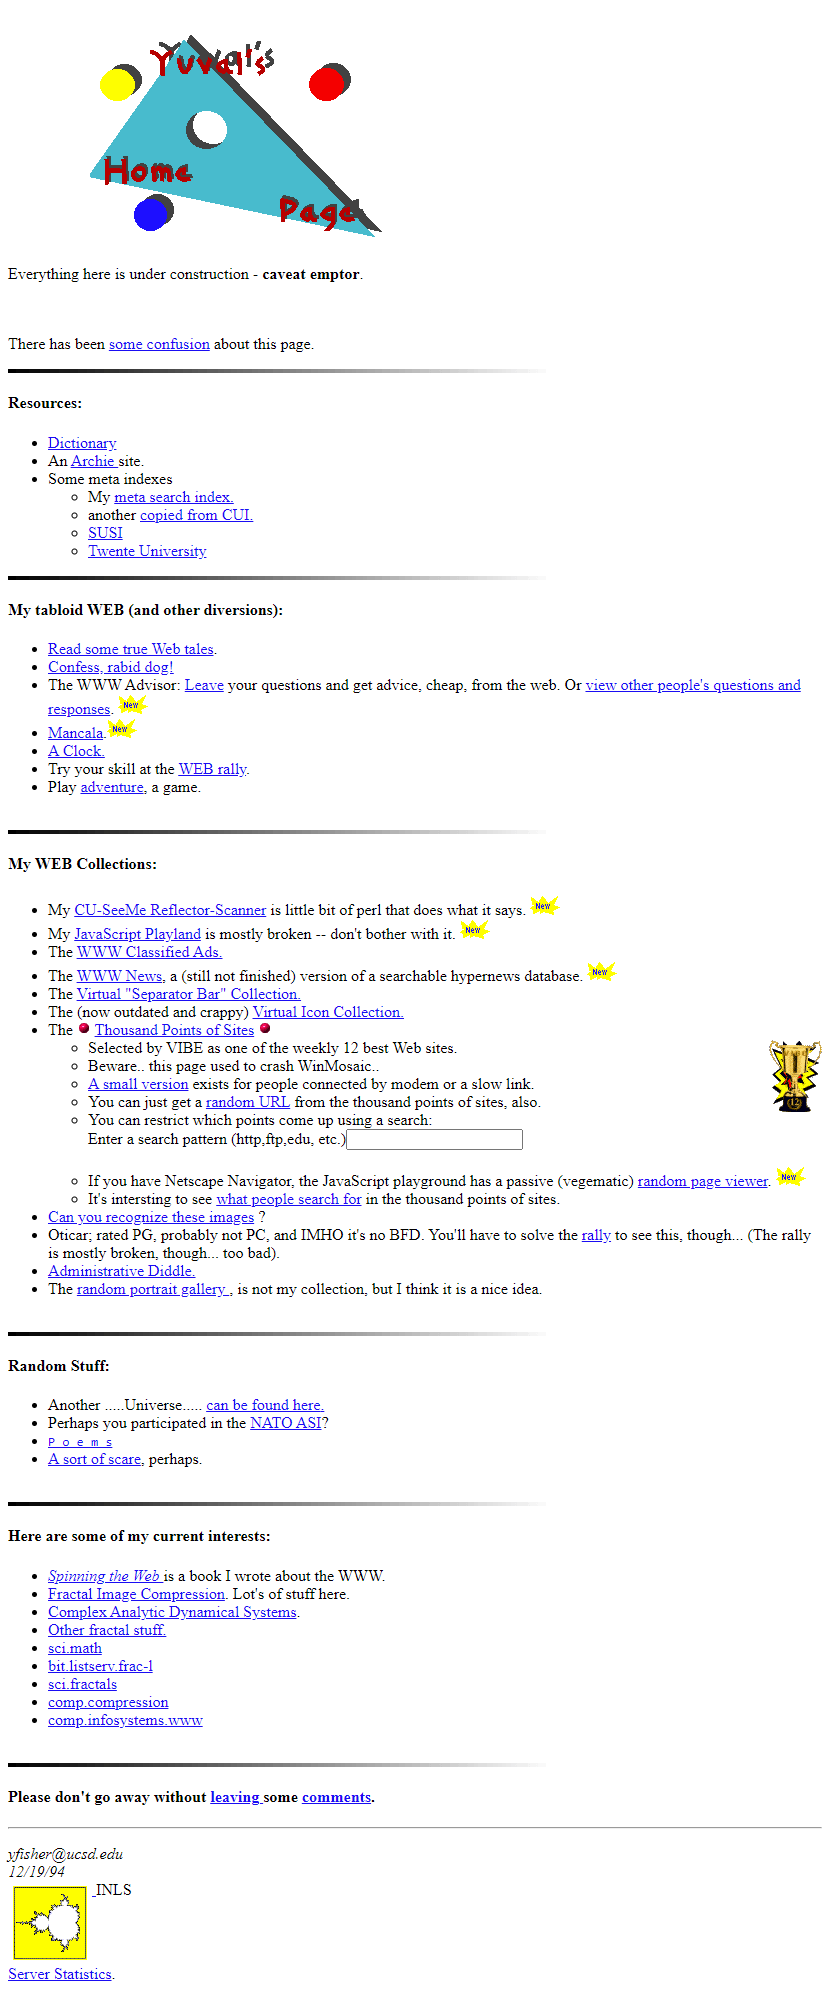 Yuval Fisher's Home Page in 1994